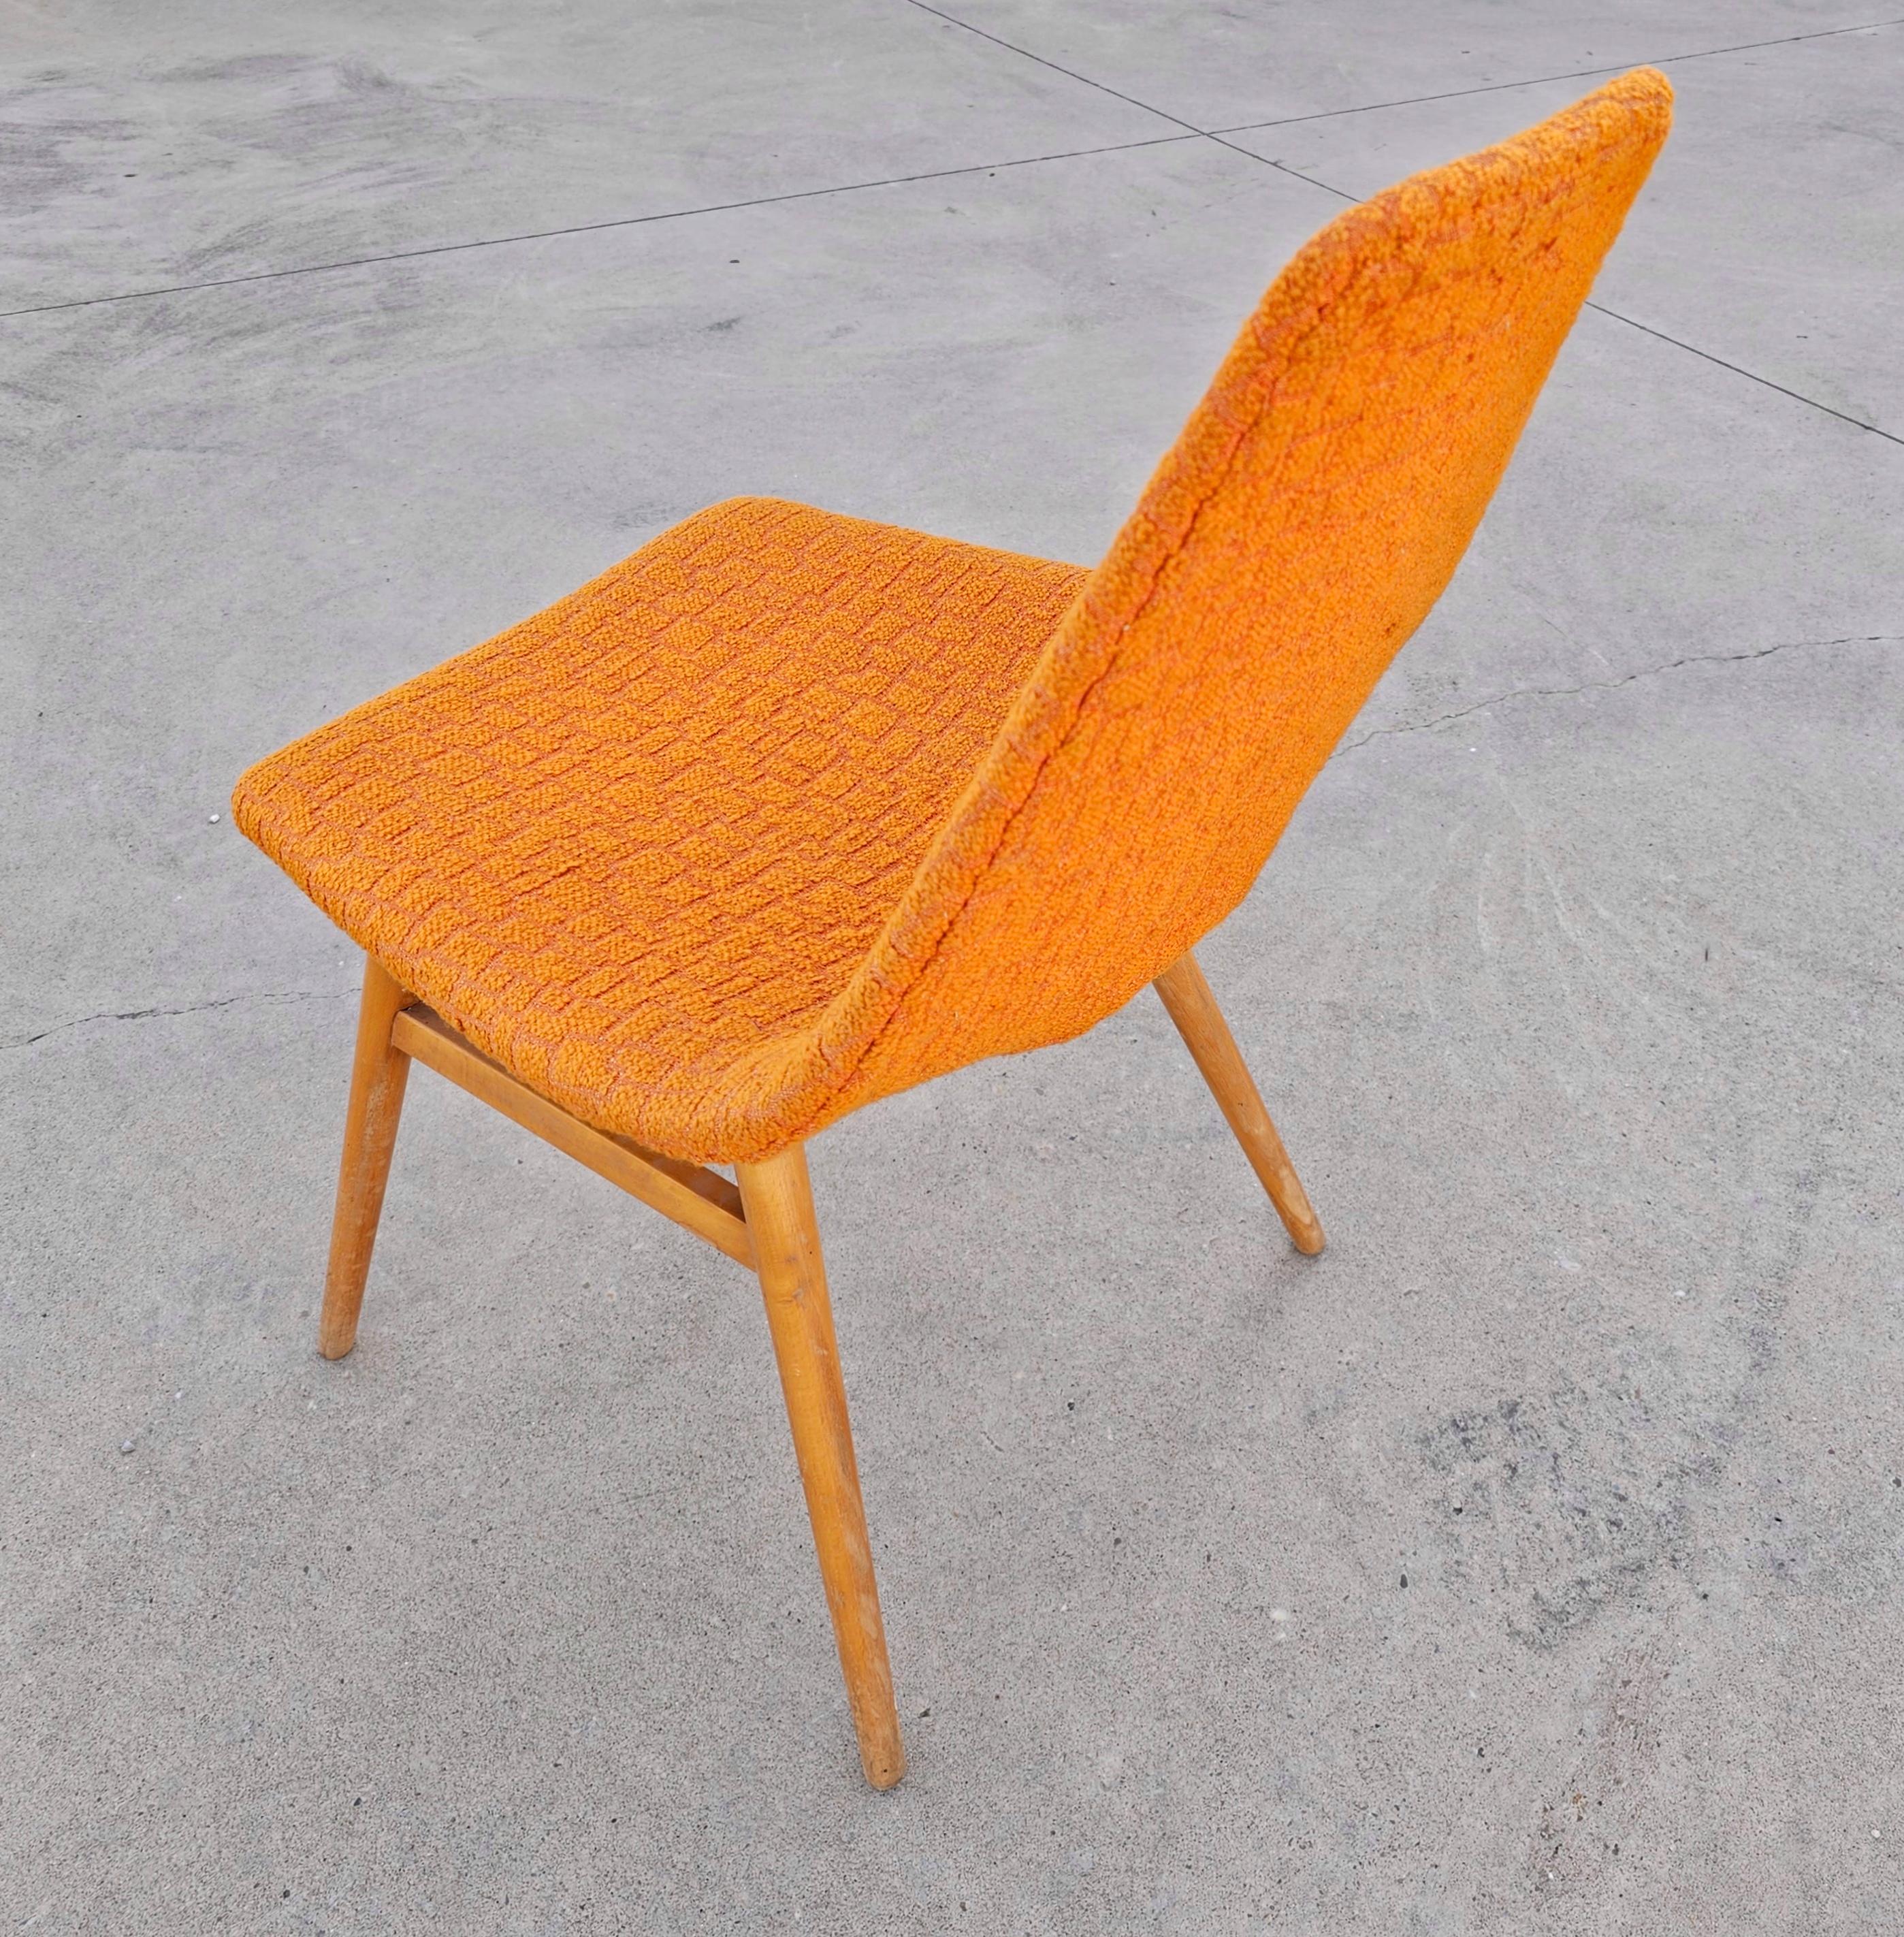 Pair of Mid-Century Modern Side Chairs by Judit Burian and Erika Szek, 1950s For Sale 5